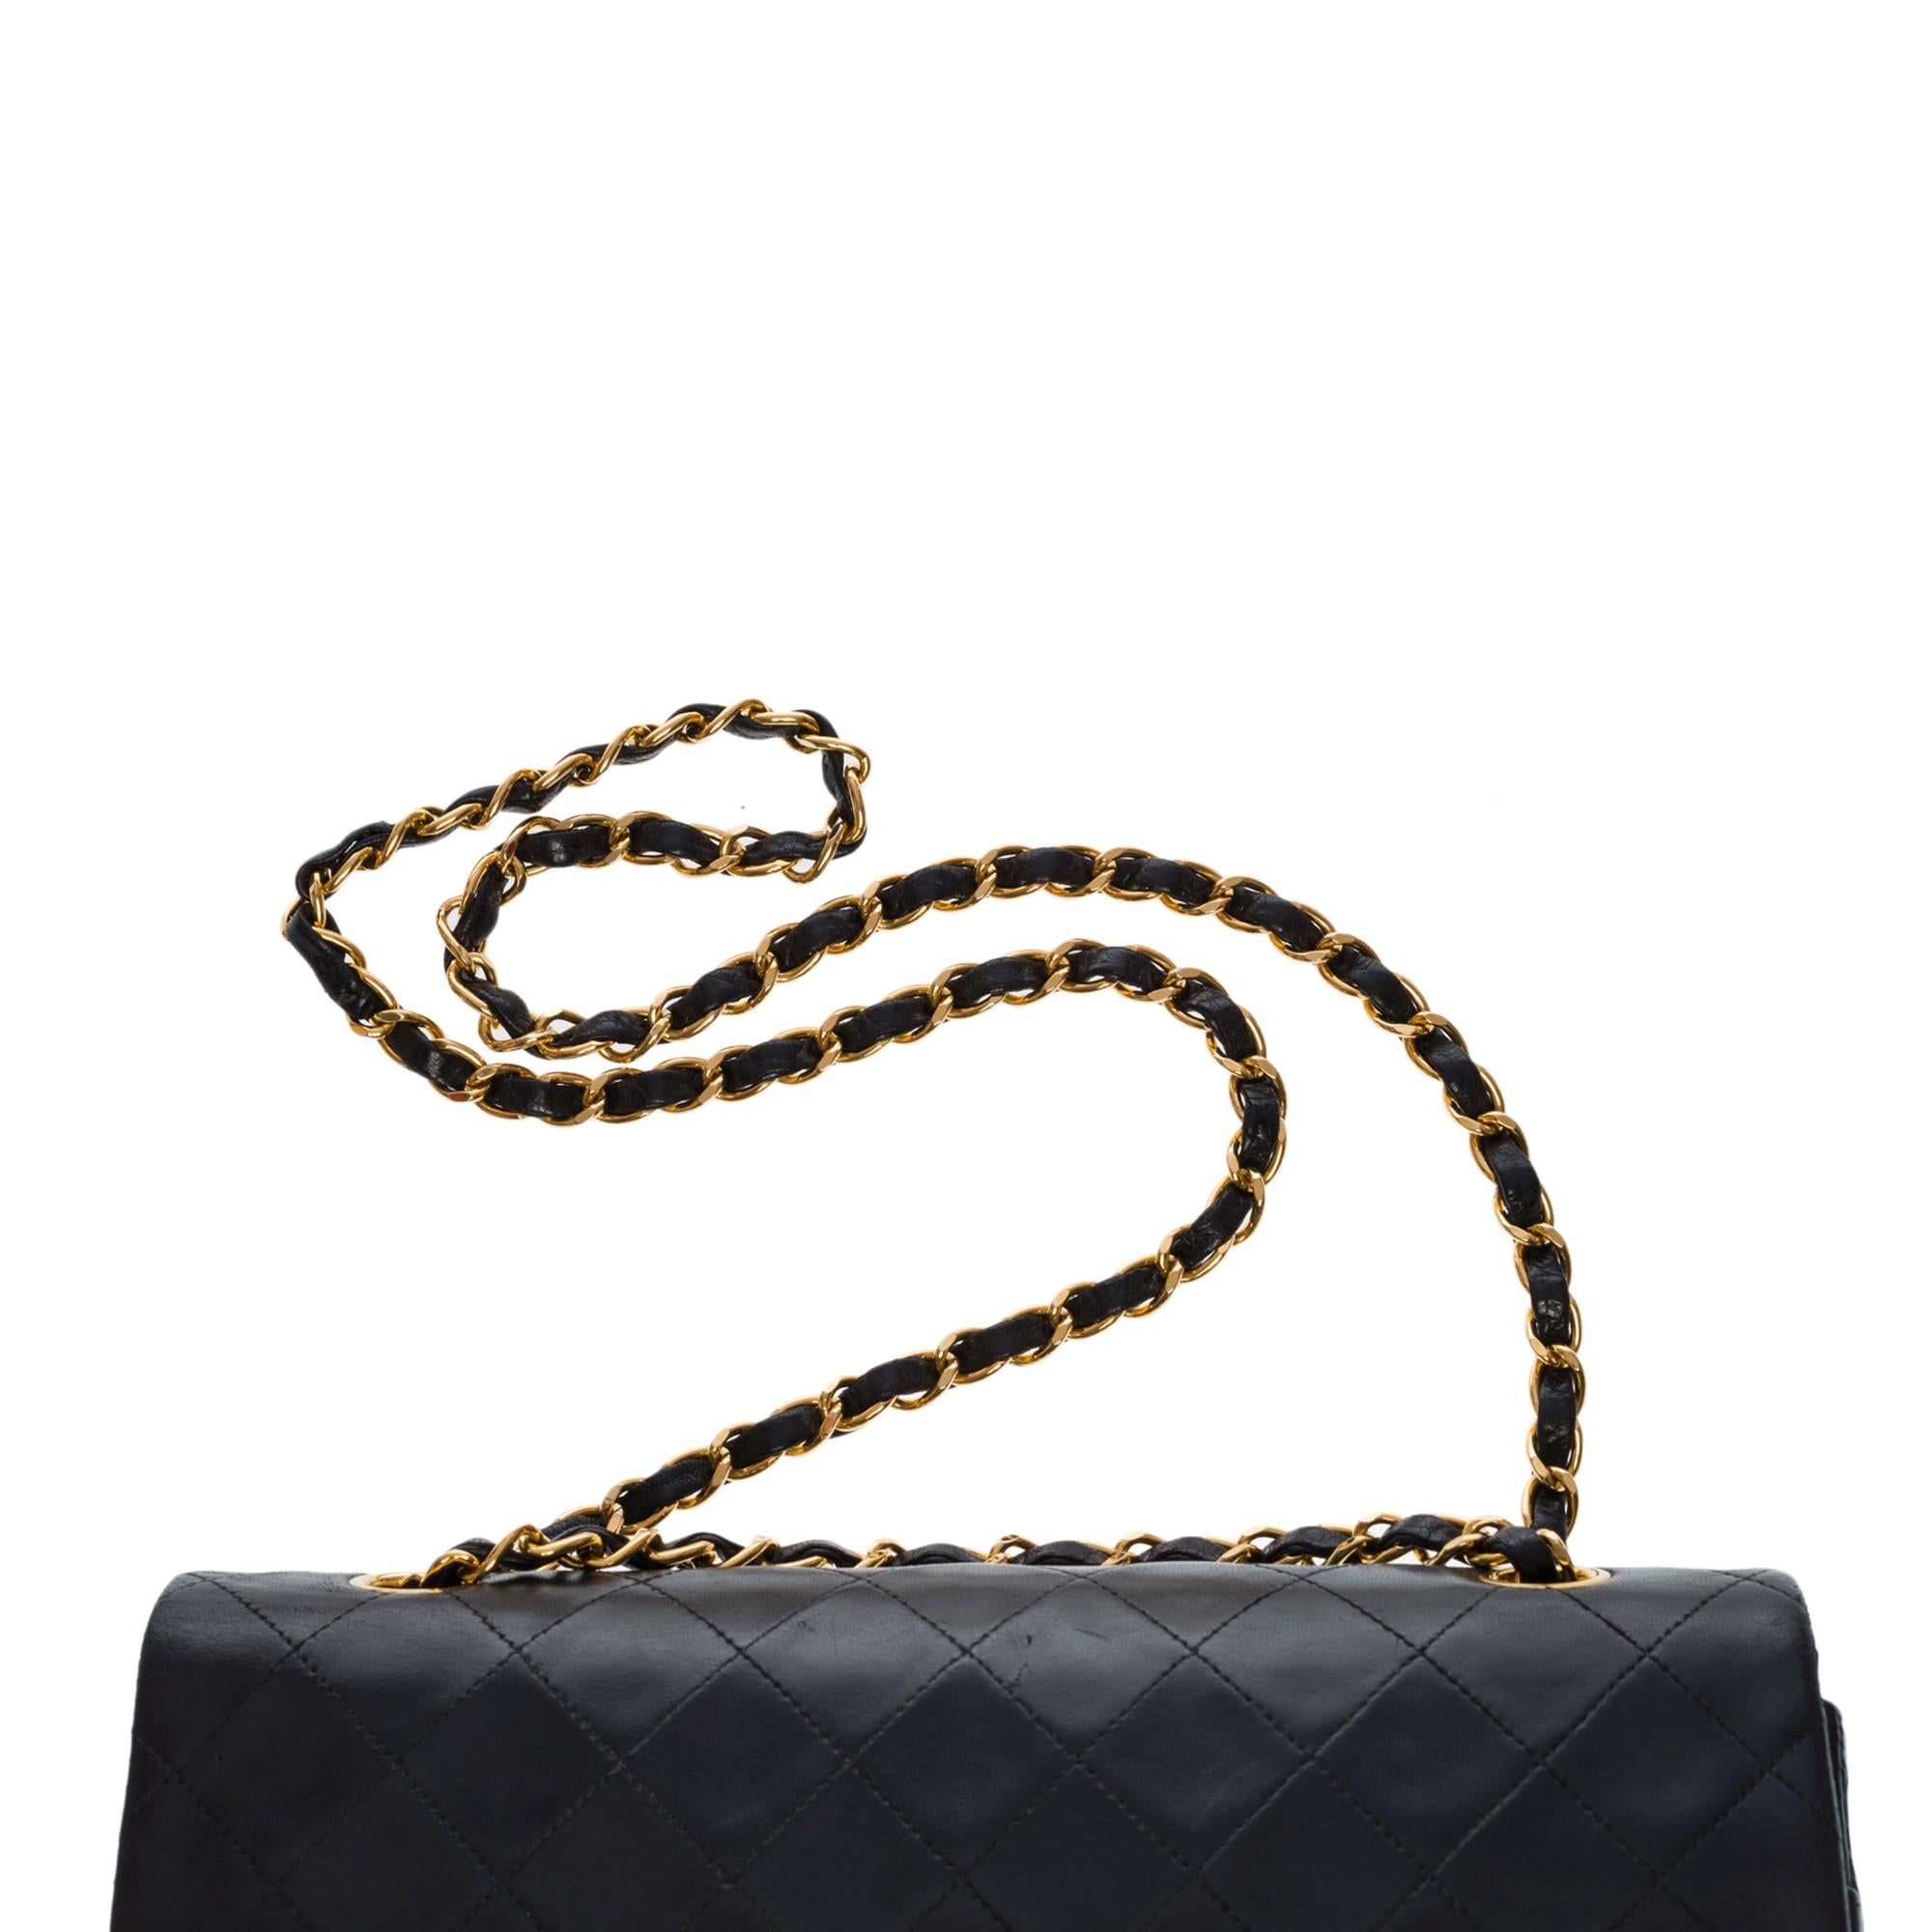 Chanel Timeless Medium double flap shoulder bag in black quilted lambskin , GHW 4